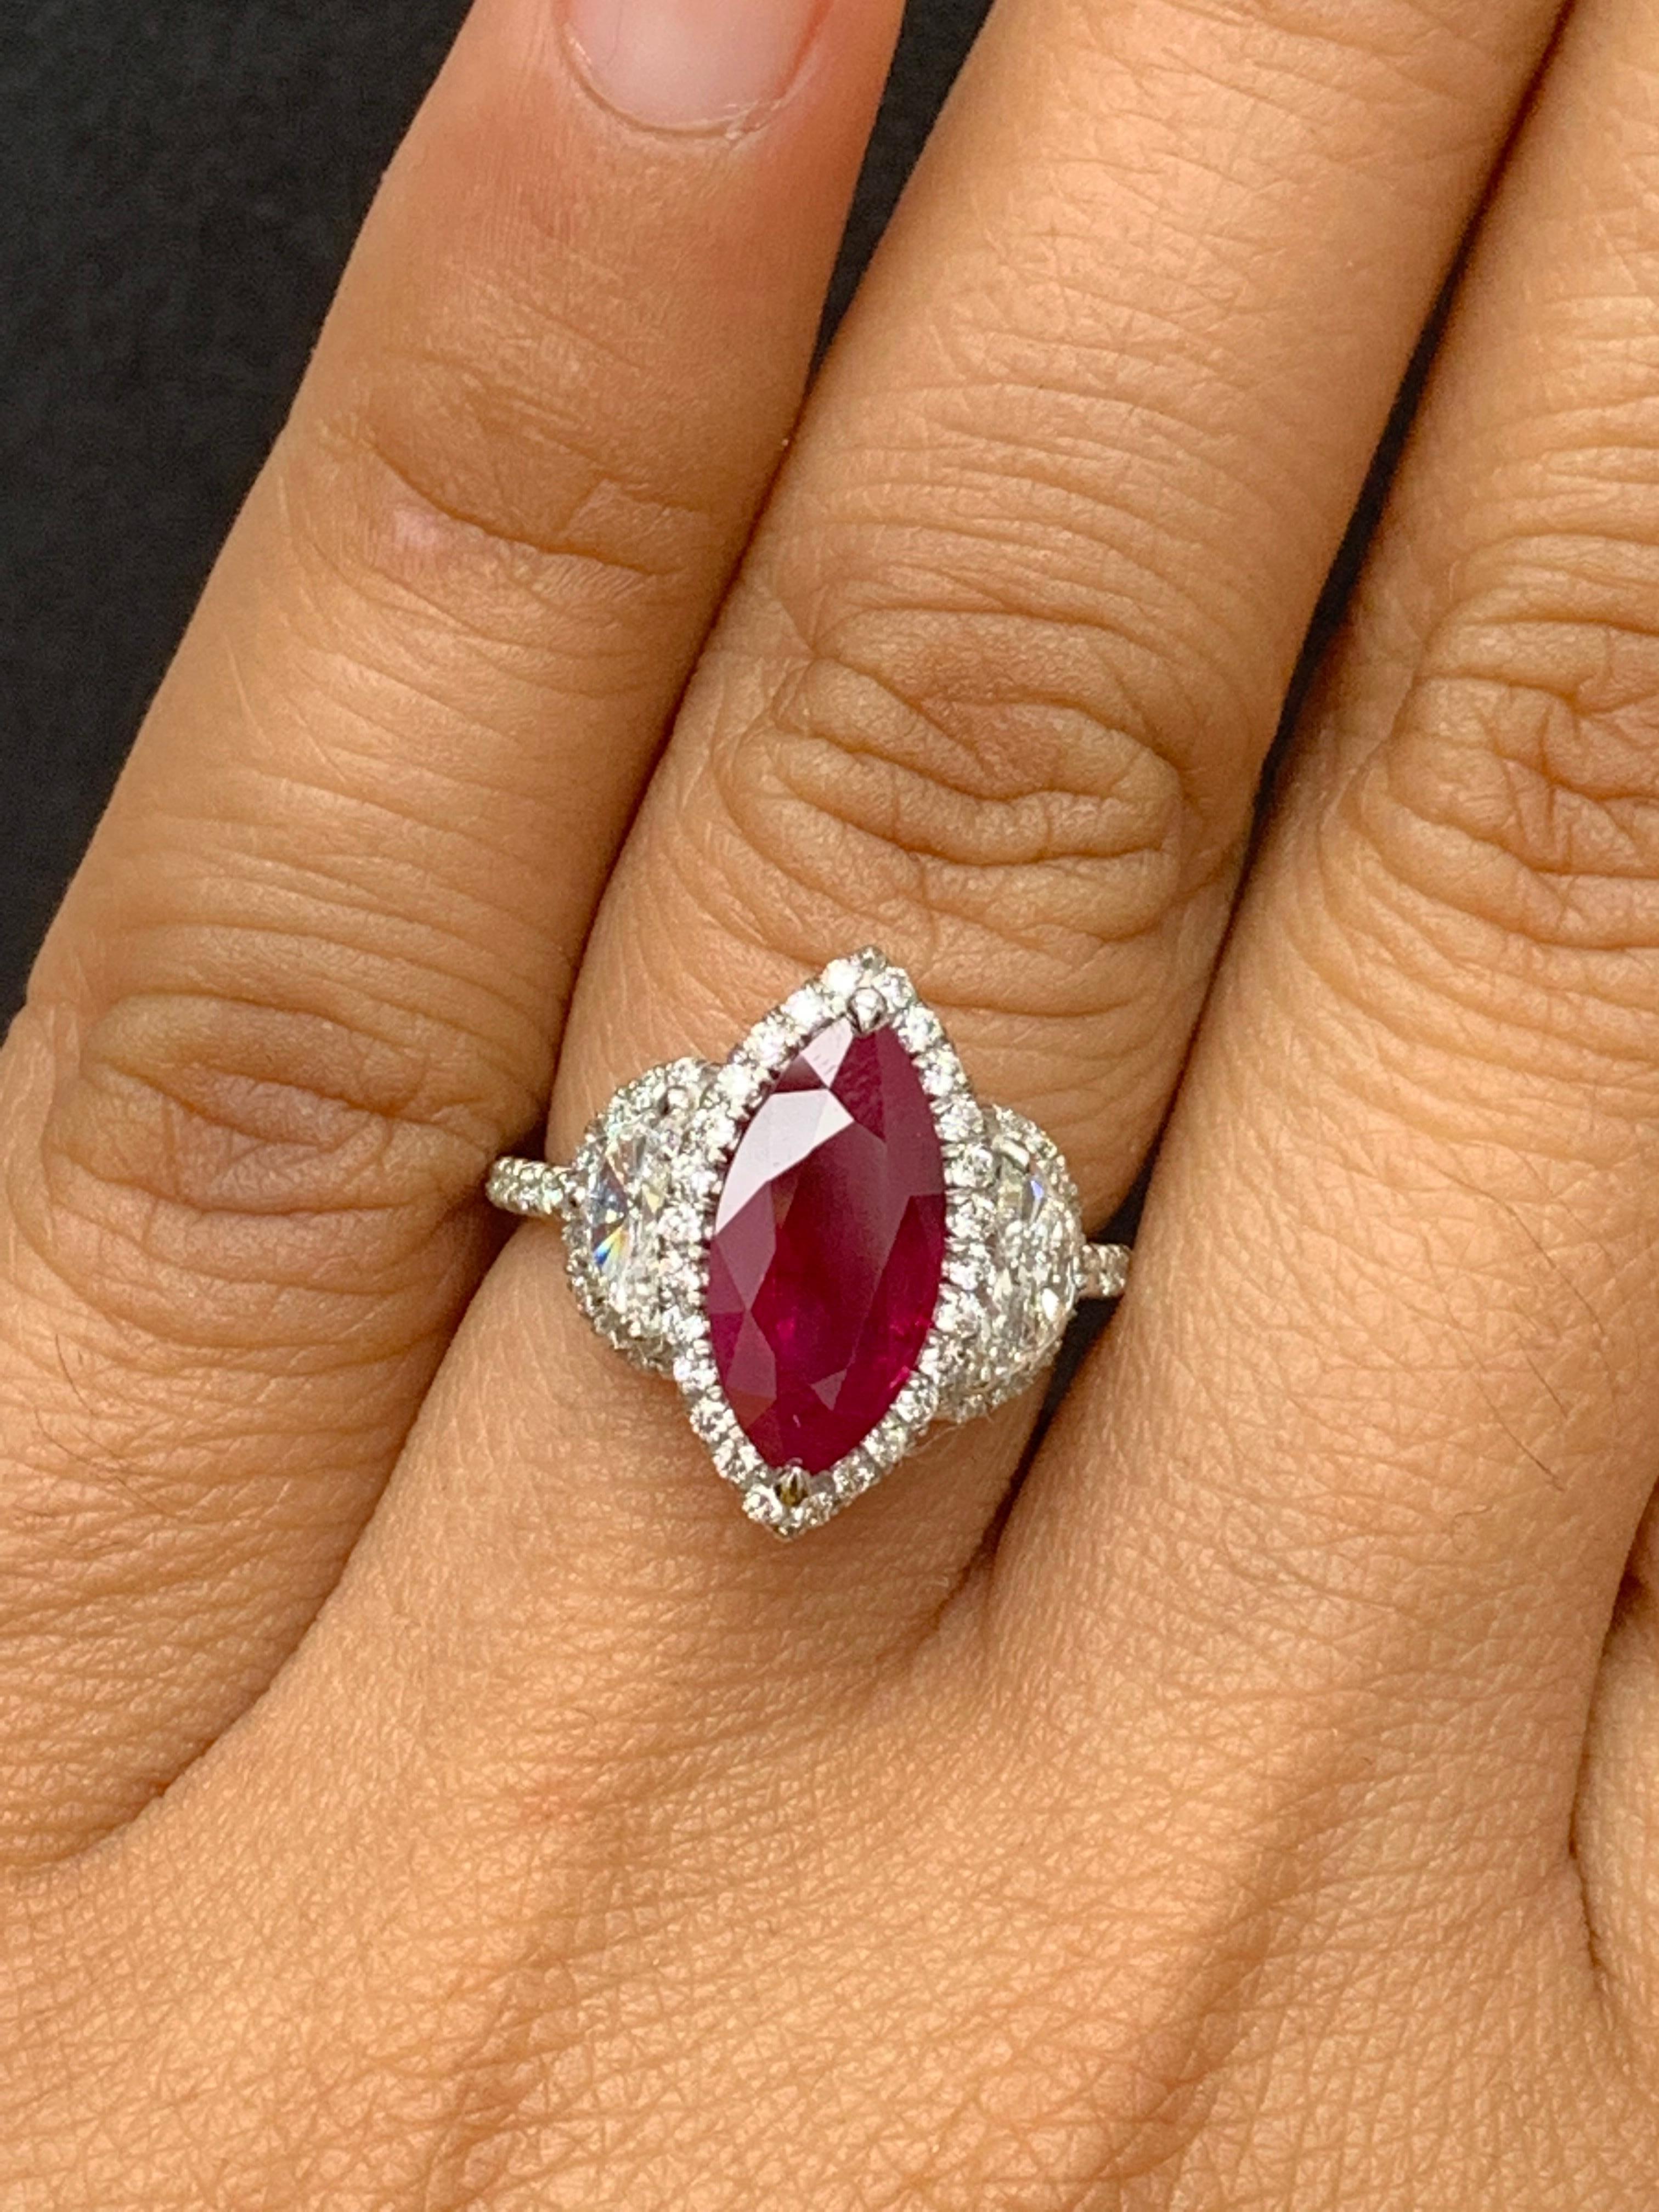 Certified 3.01 Carat Marquise Cut Burma Ruby Diamond 3 Stone Halo Ring Platinum For Sale 9